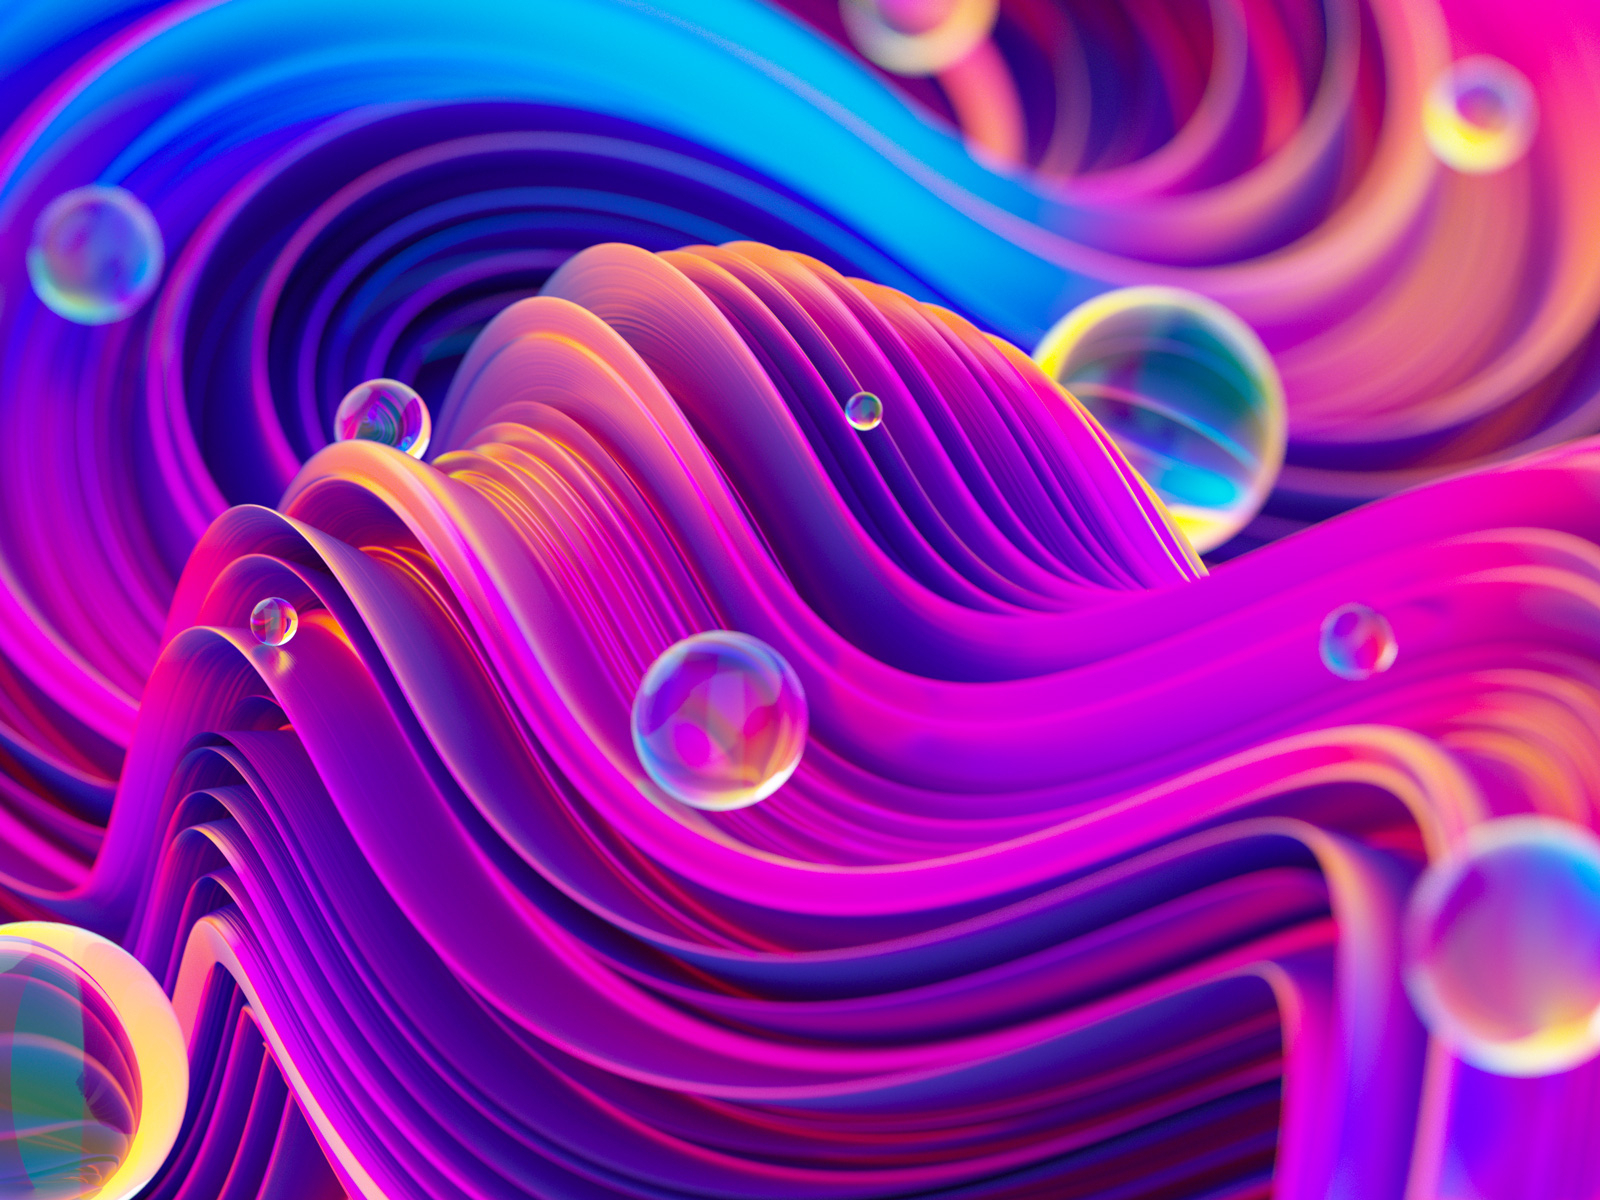 Abstract Liquid 3D Backgrounds #3 by Alexey Boldin on Dribbble